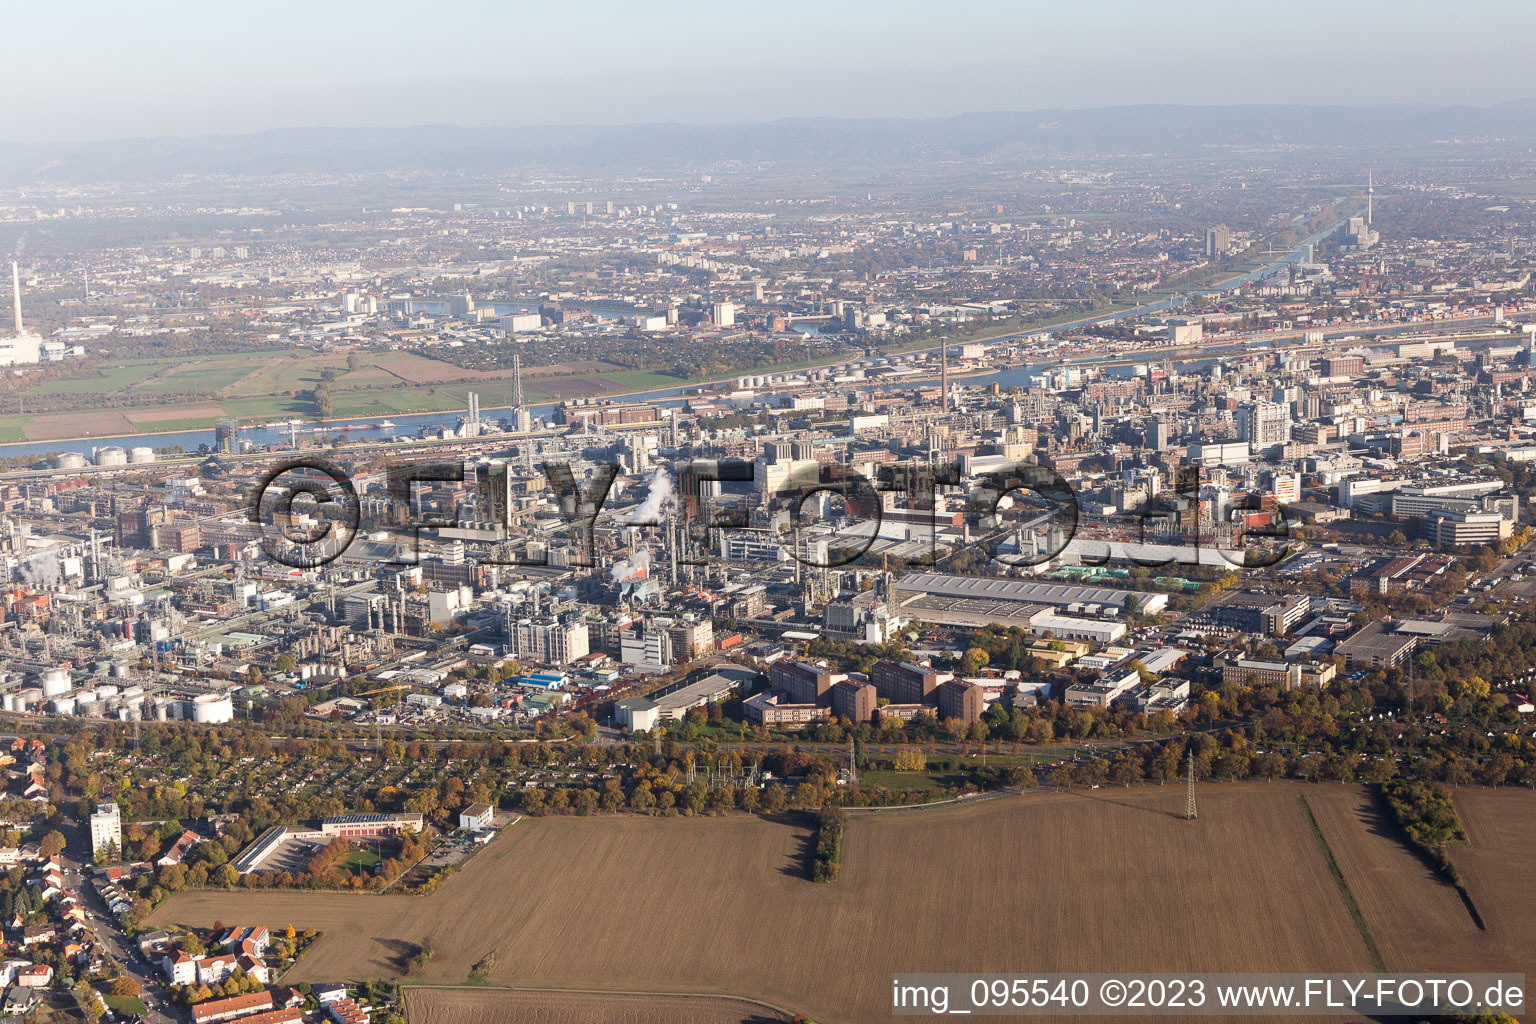 District BASF in Ludwigshafen am Rhein in the state Rhineland-Palatinate, Germany from the drone perspective